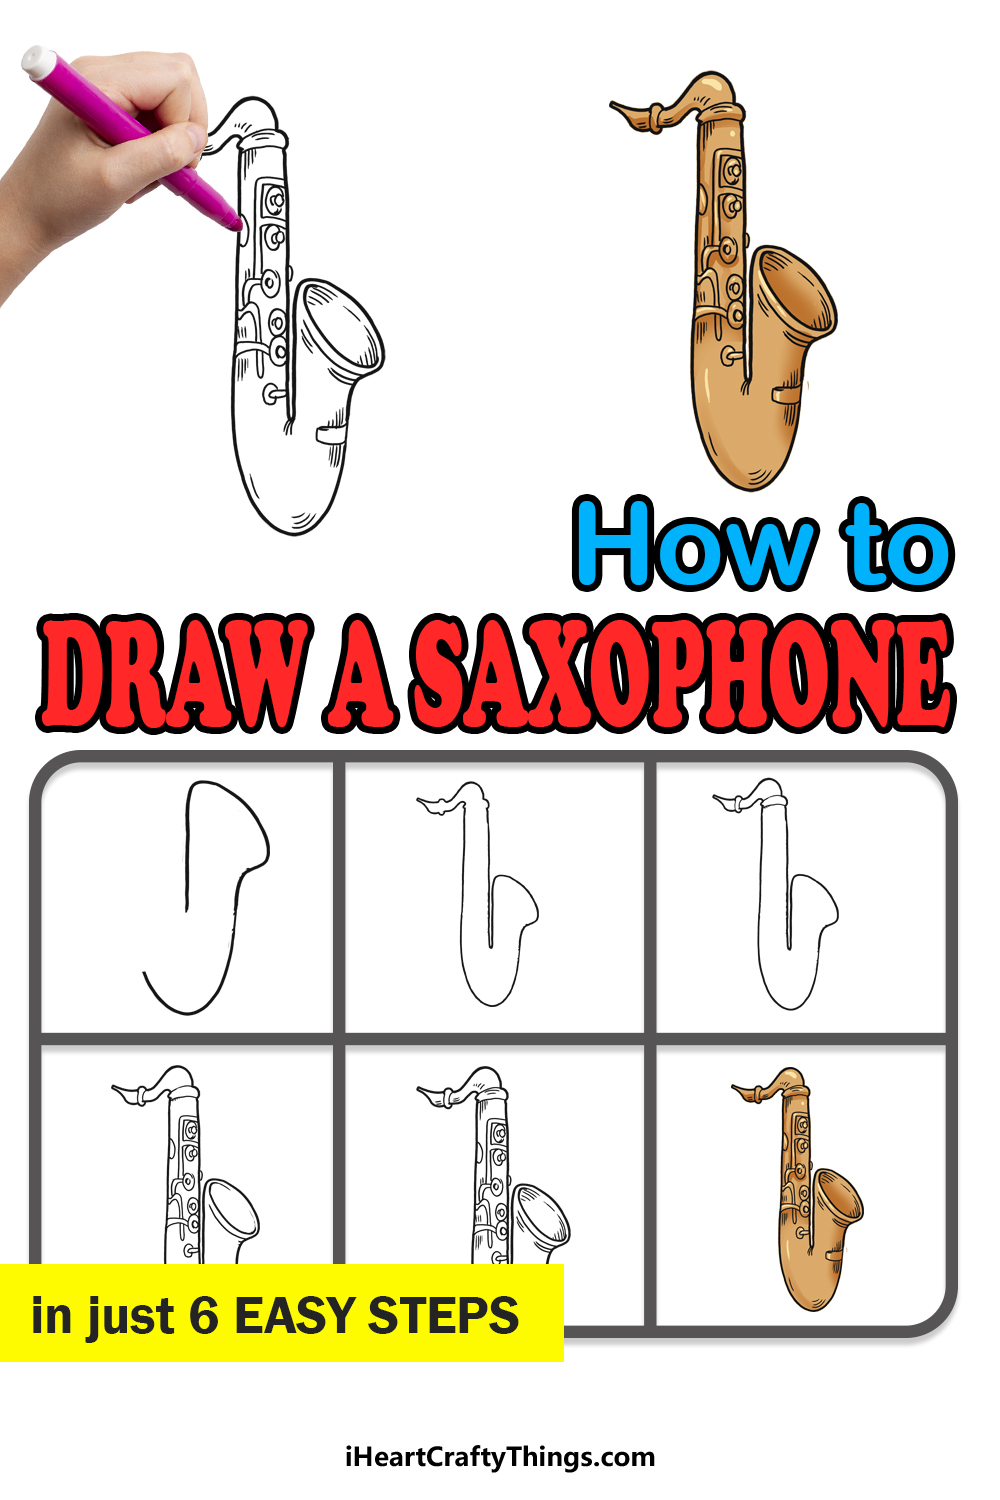 How to Draw A Saxophone step by step guide